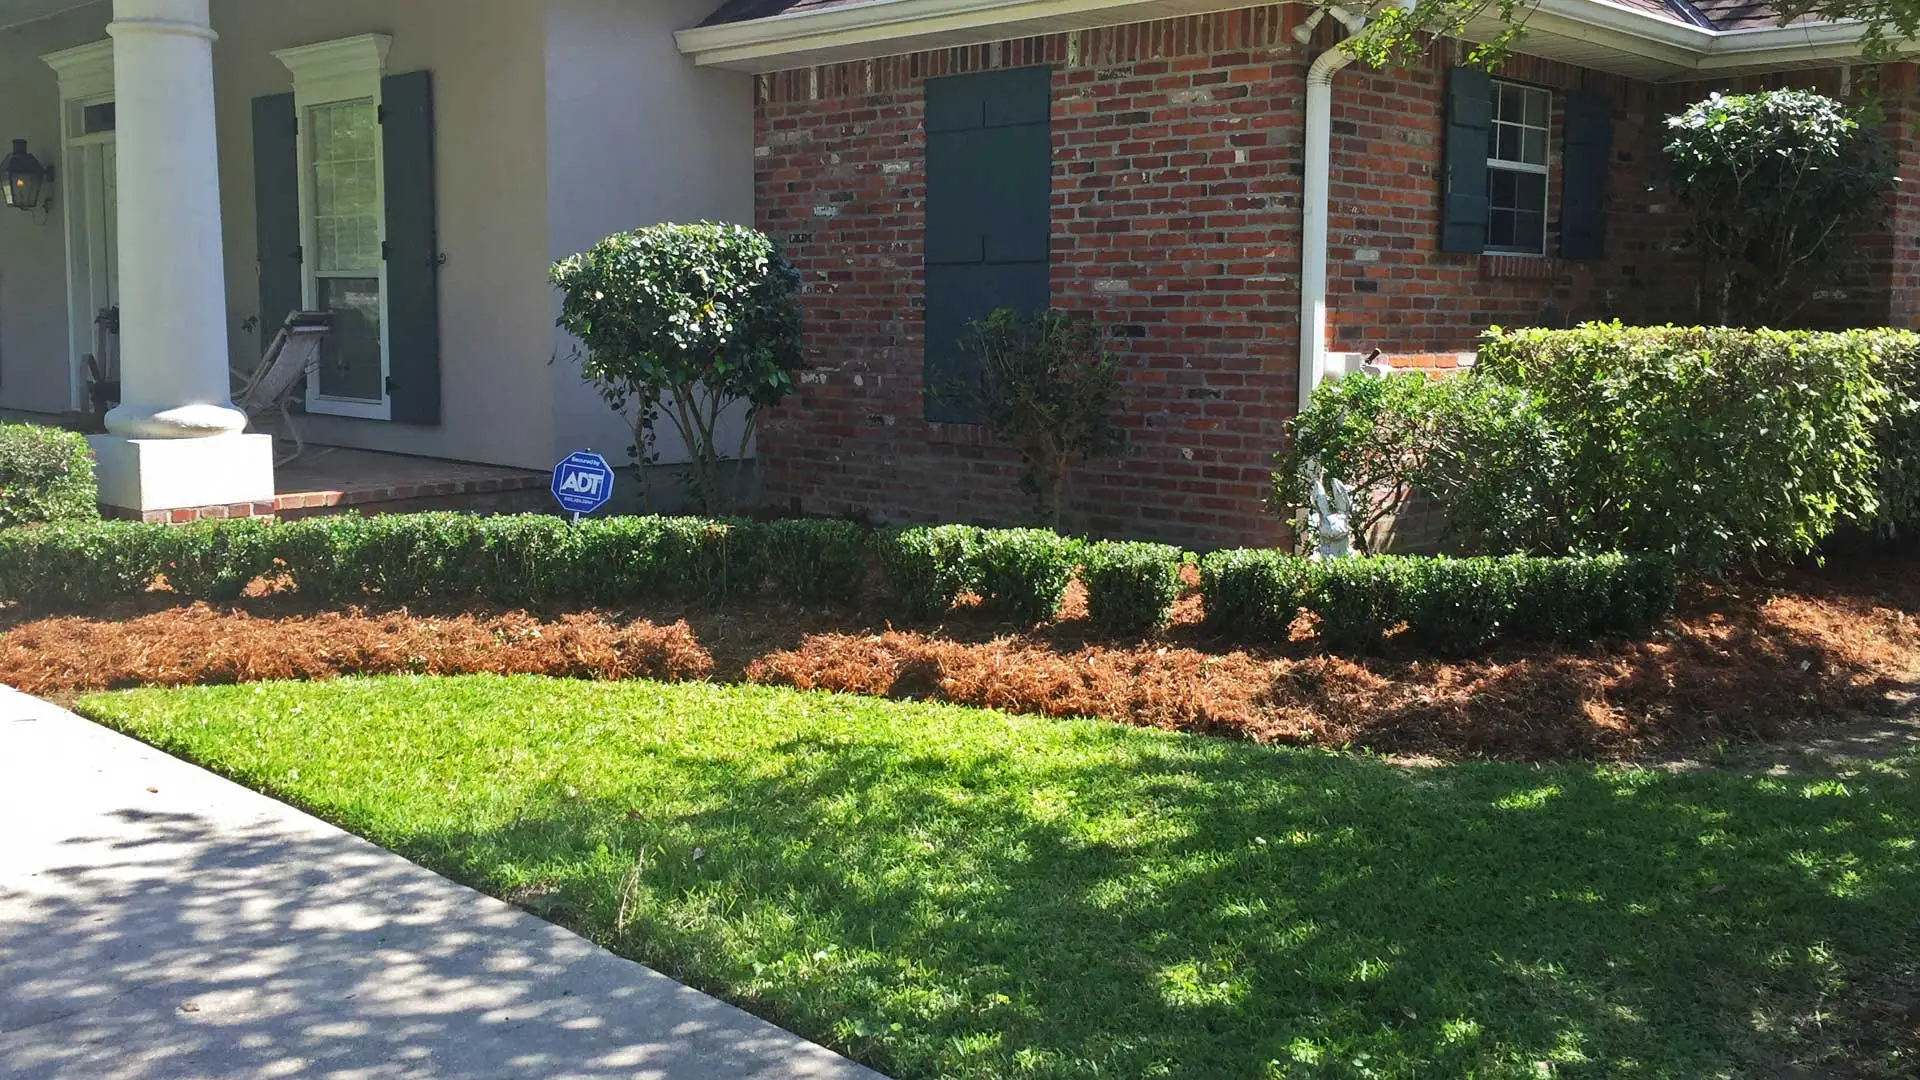 Beautifully maintained landscaping with new mulch at a residential property.